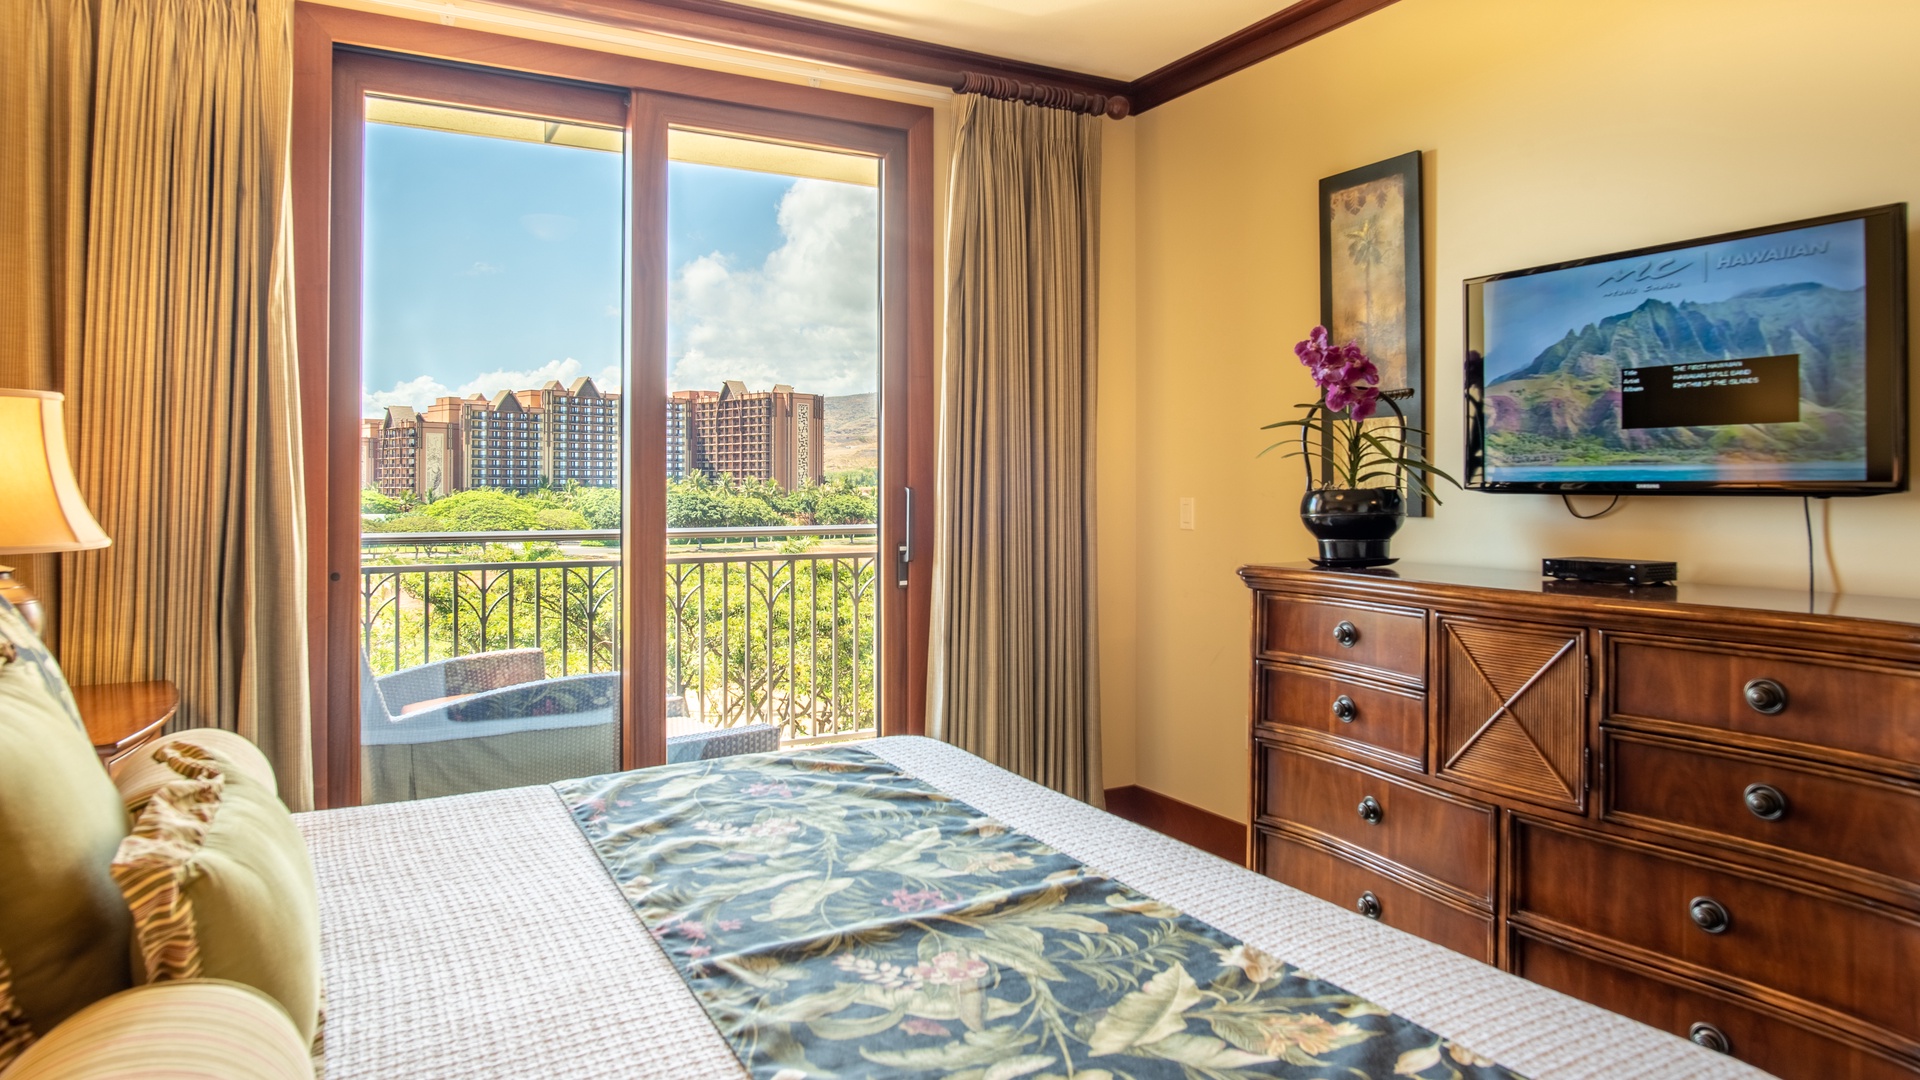 Kapolei Vacation Rentals, Ko Olina Beach Villas B602 - The primary guest bedroom with a TV and dresser.